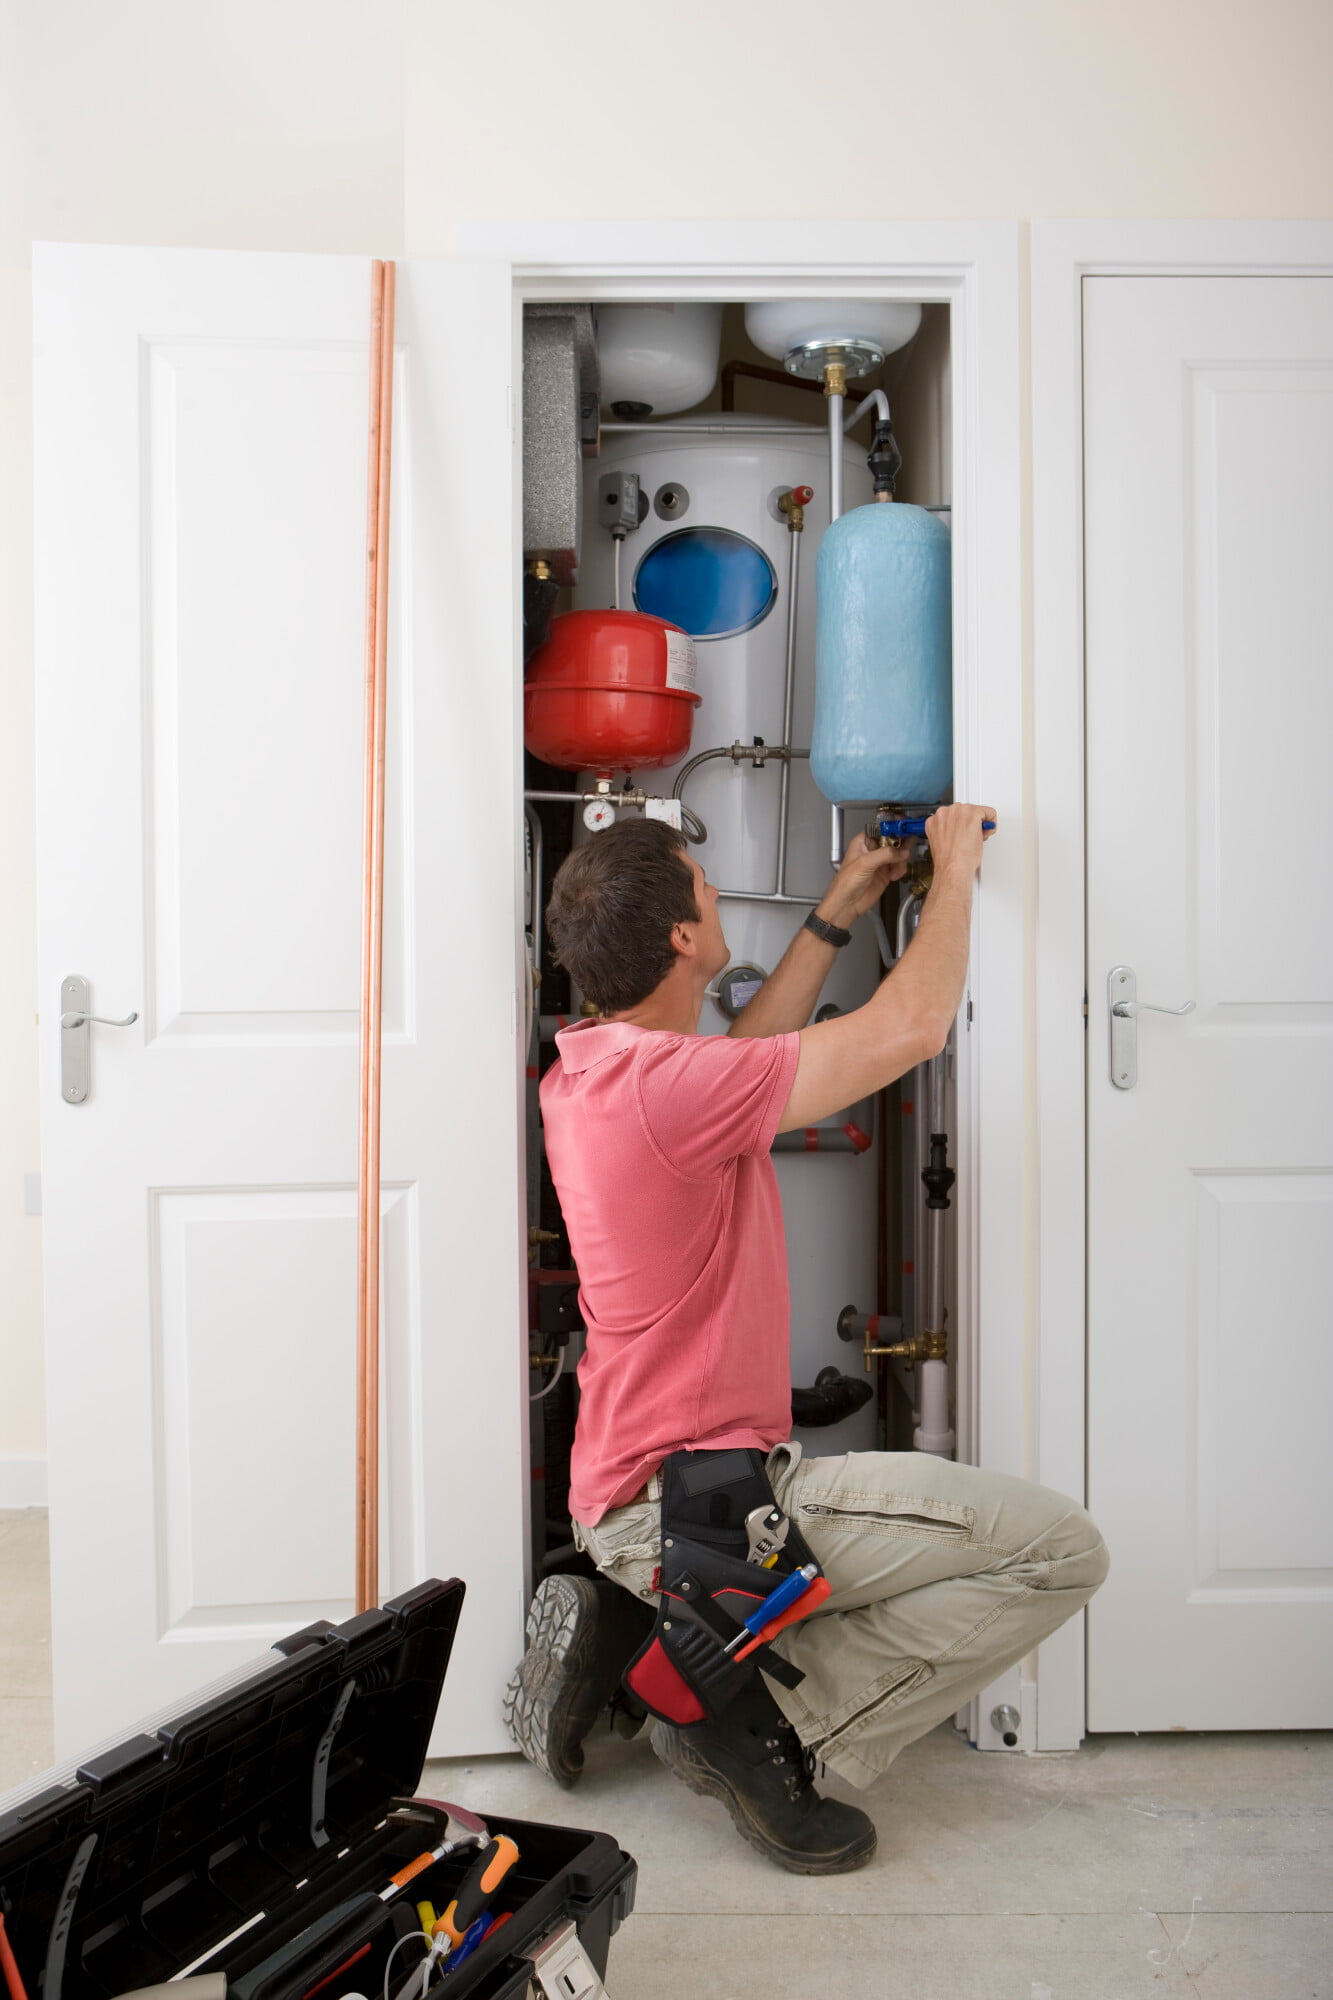 From obvious leaks to noises that are making you nervous, here are some of the common water heater issues you shouldn't ignore!